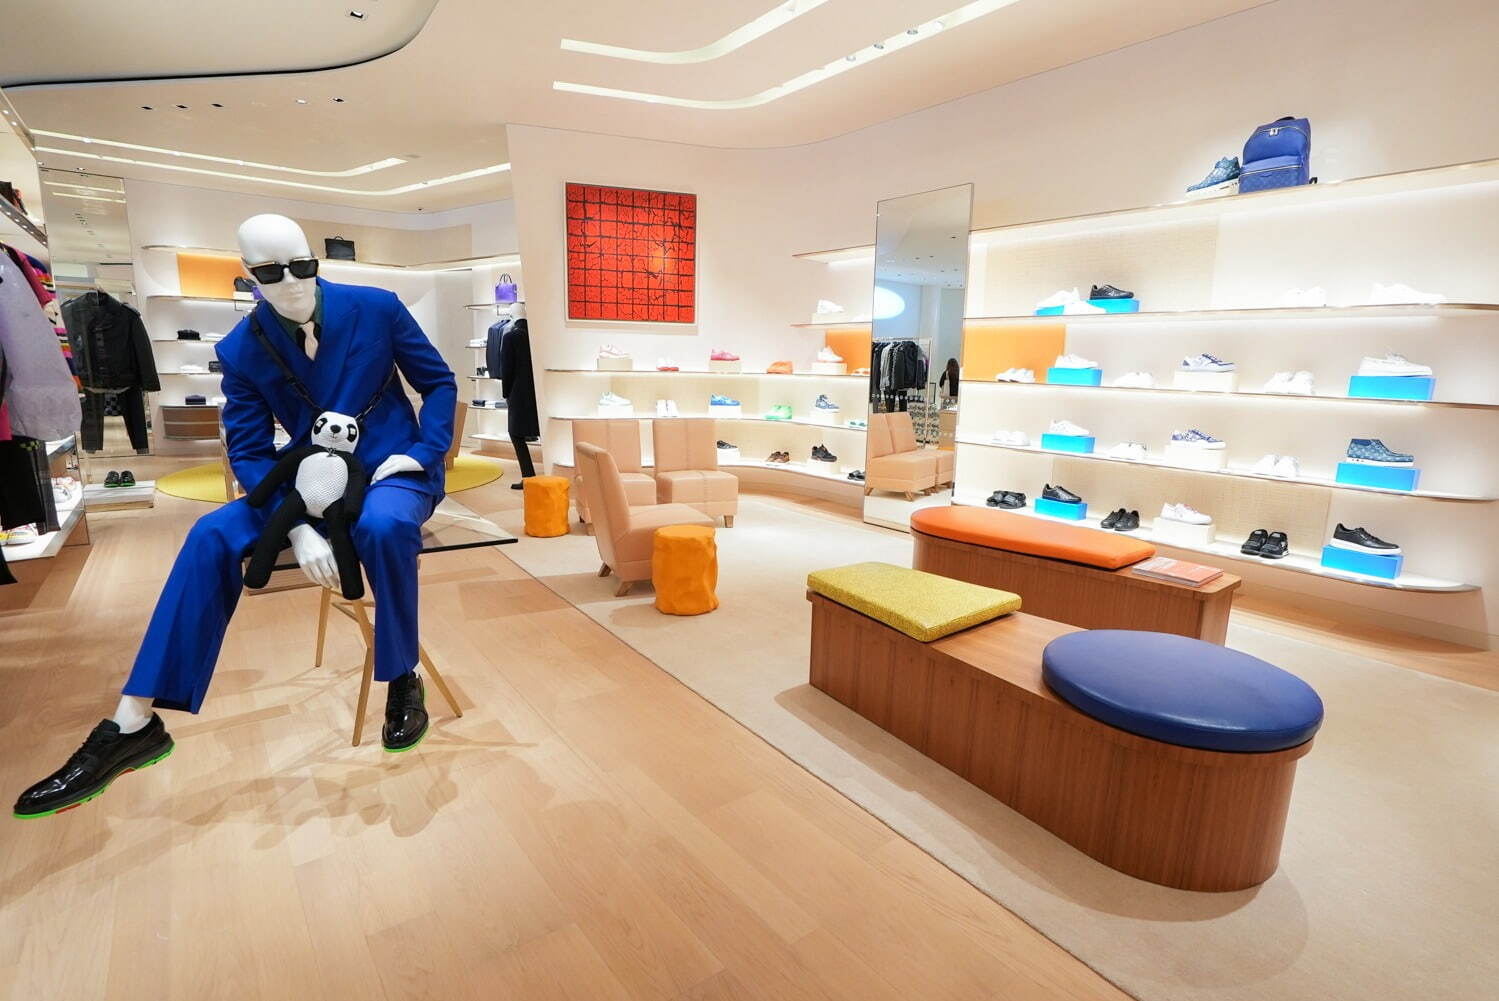 Louis Vuitton on X: Announcing #LouisVuitton's first Silver #LEED  certified building in Japan, the Ginza Namikidori store. The @USGBC 's  stringent standards attest to the store's energy and water efficiency and  use